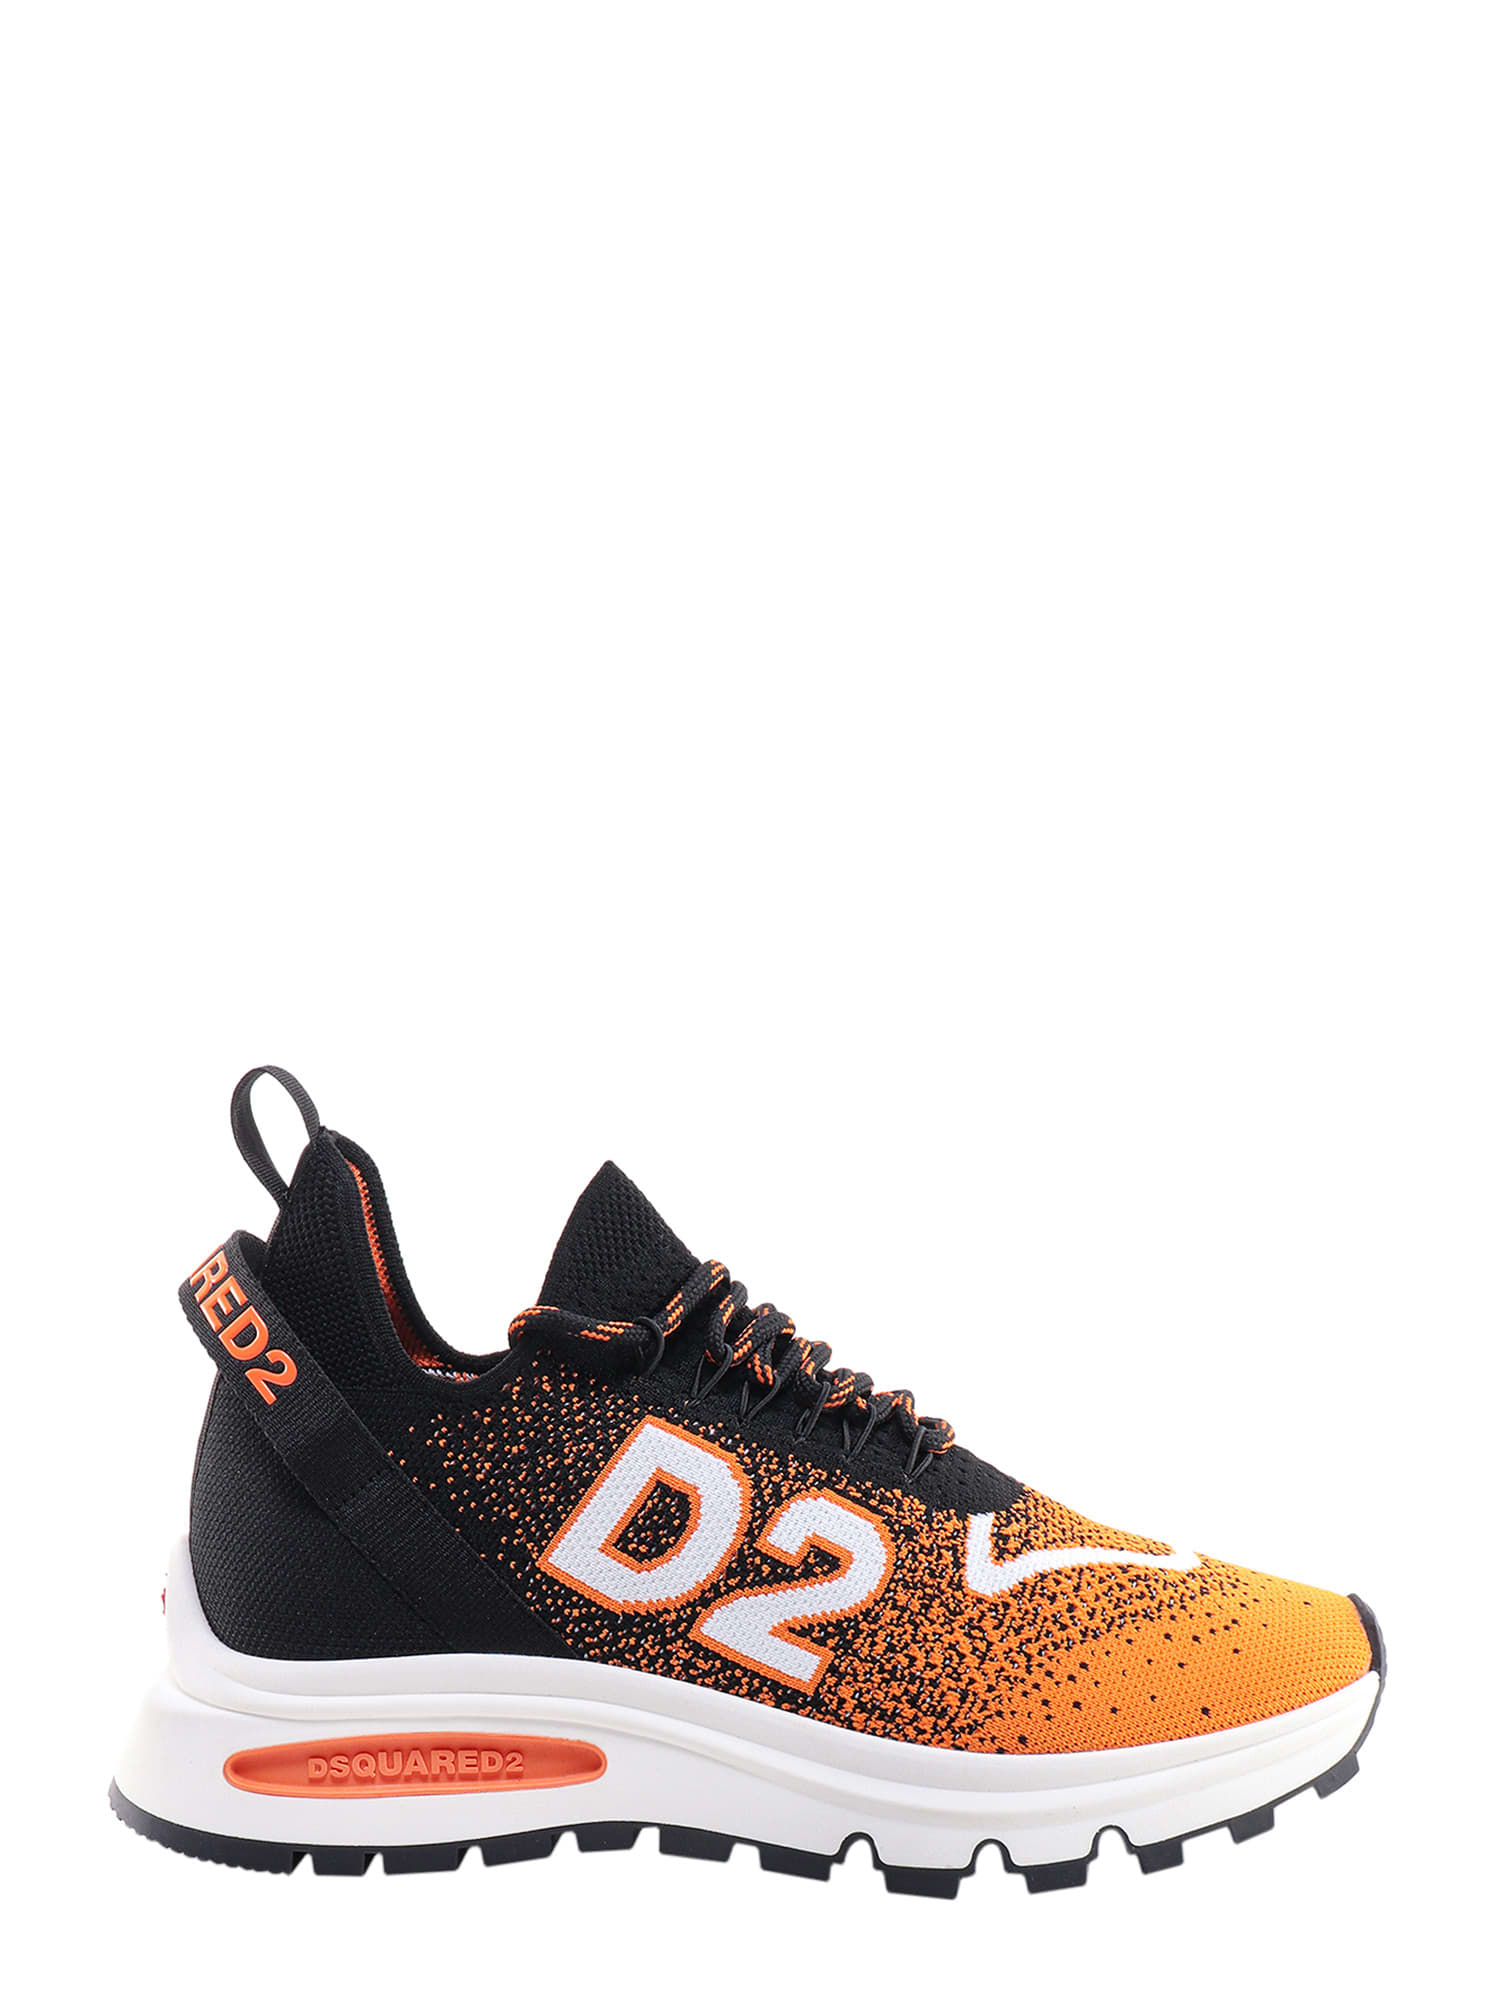 DSQUARED2 RUNDS2 SNEAKERS